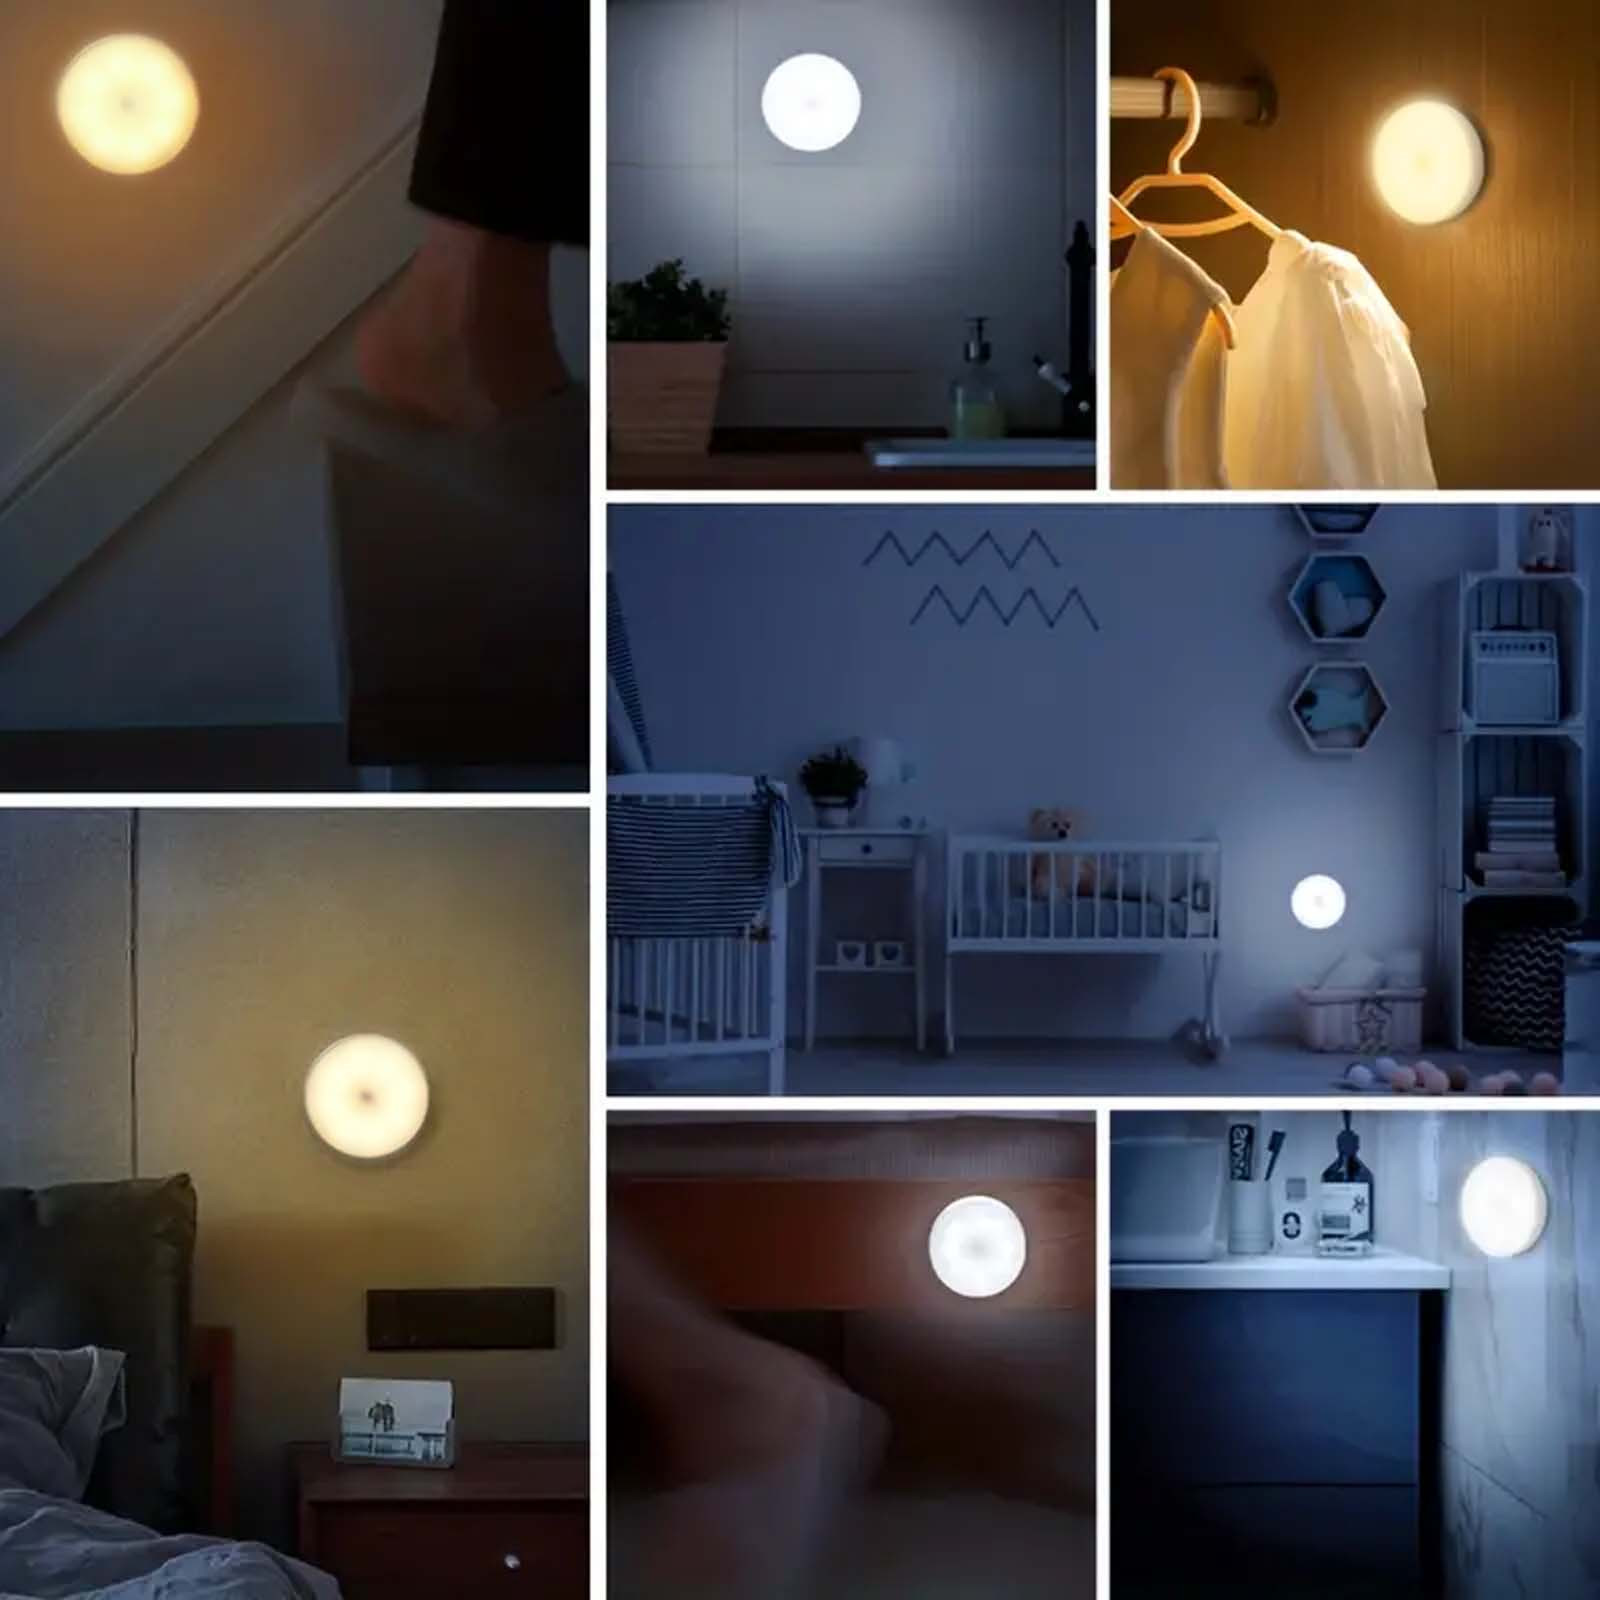 8-LED USB Rechargeable Night Light,Body Induction Lamp,3 Working Modes,Smart Wall Light With Stick-On Magnetic Strip For Homes, Bathroom, Bedroom, Kitchen, Hallways, Cars, Garages And Corridor Decor details 5